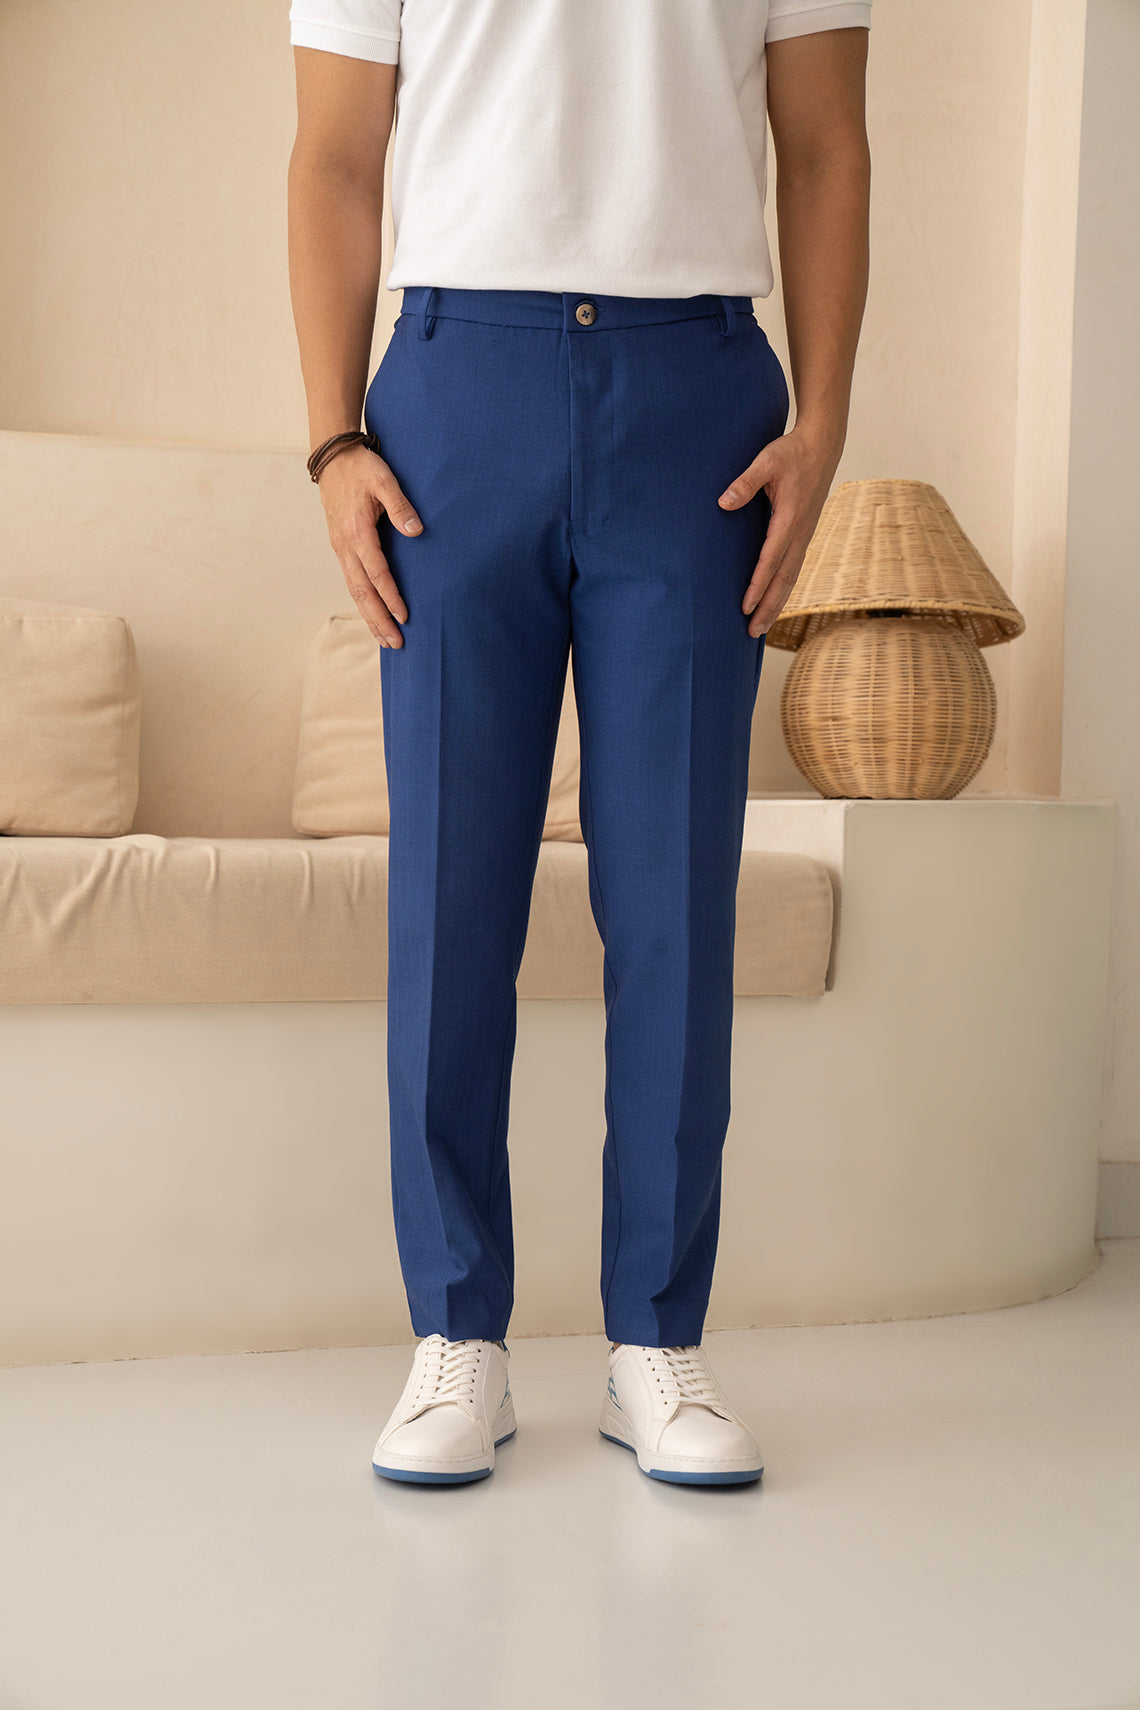 Amazon.com: Twillory Performance 5-Pocket Tailored Fit Casual Men's Pants -  Blue/Size: 30x30 : Clothing, Shoes & Jewelry